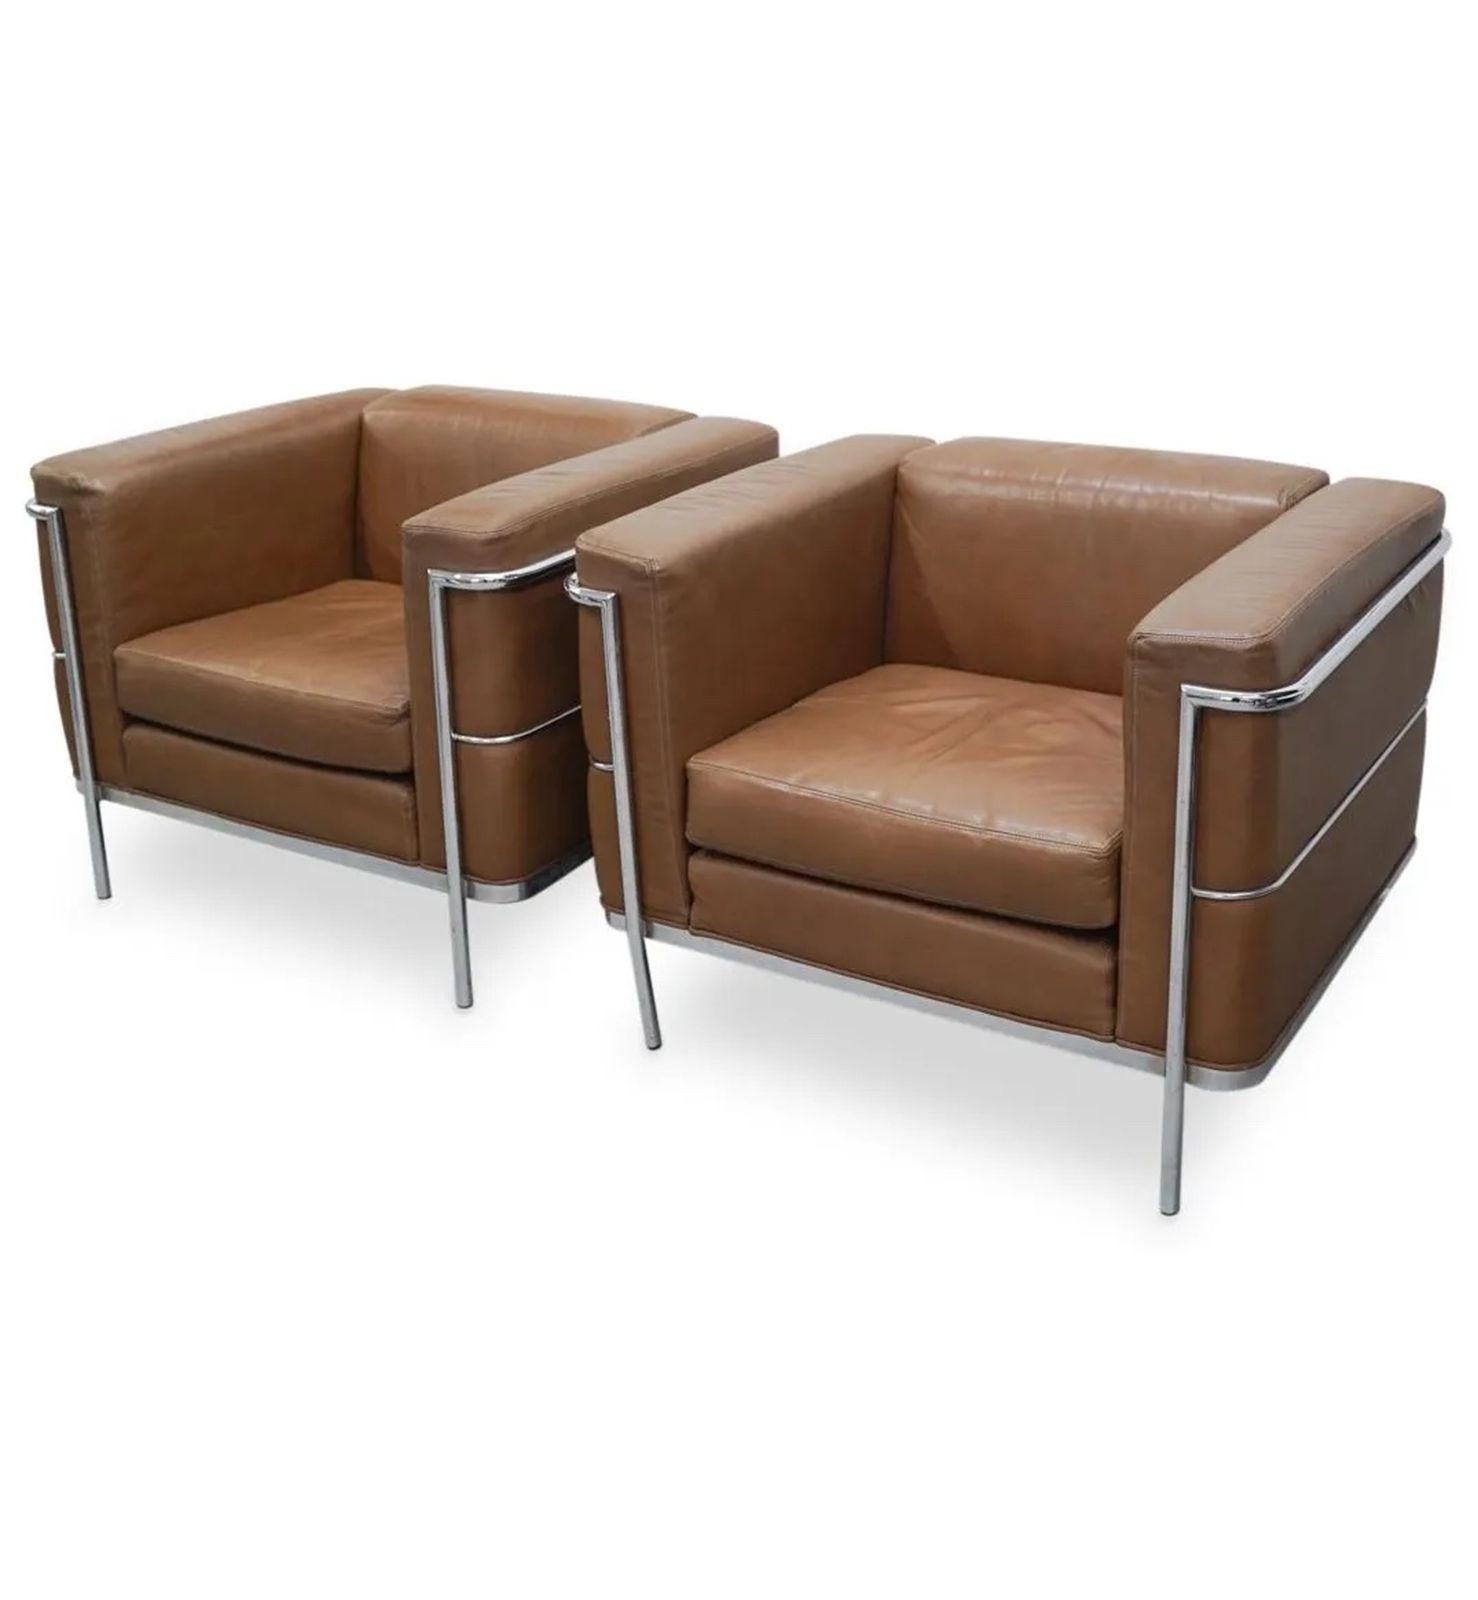 Pair of vintage club chairs upholstered with nutmeg brown leather and supported by chrome frames. Made in c. 1983 by Jack Cartwright Design.
Dimensions:
27